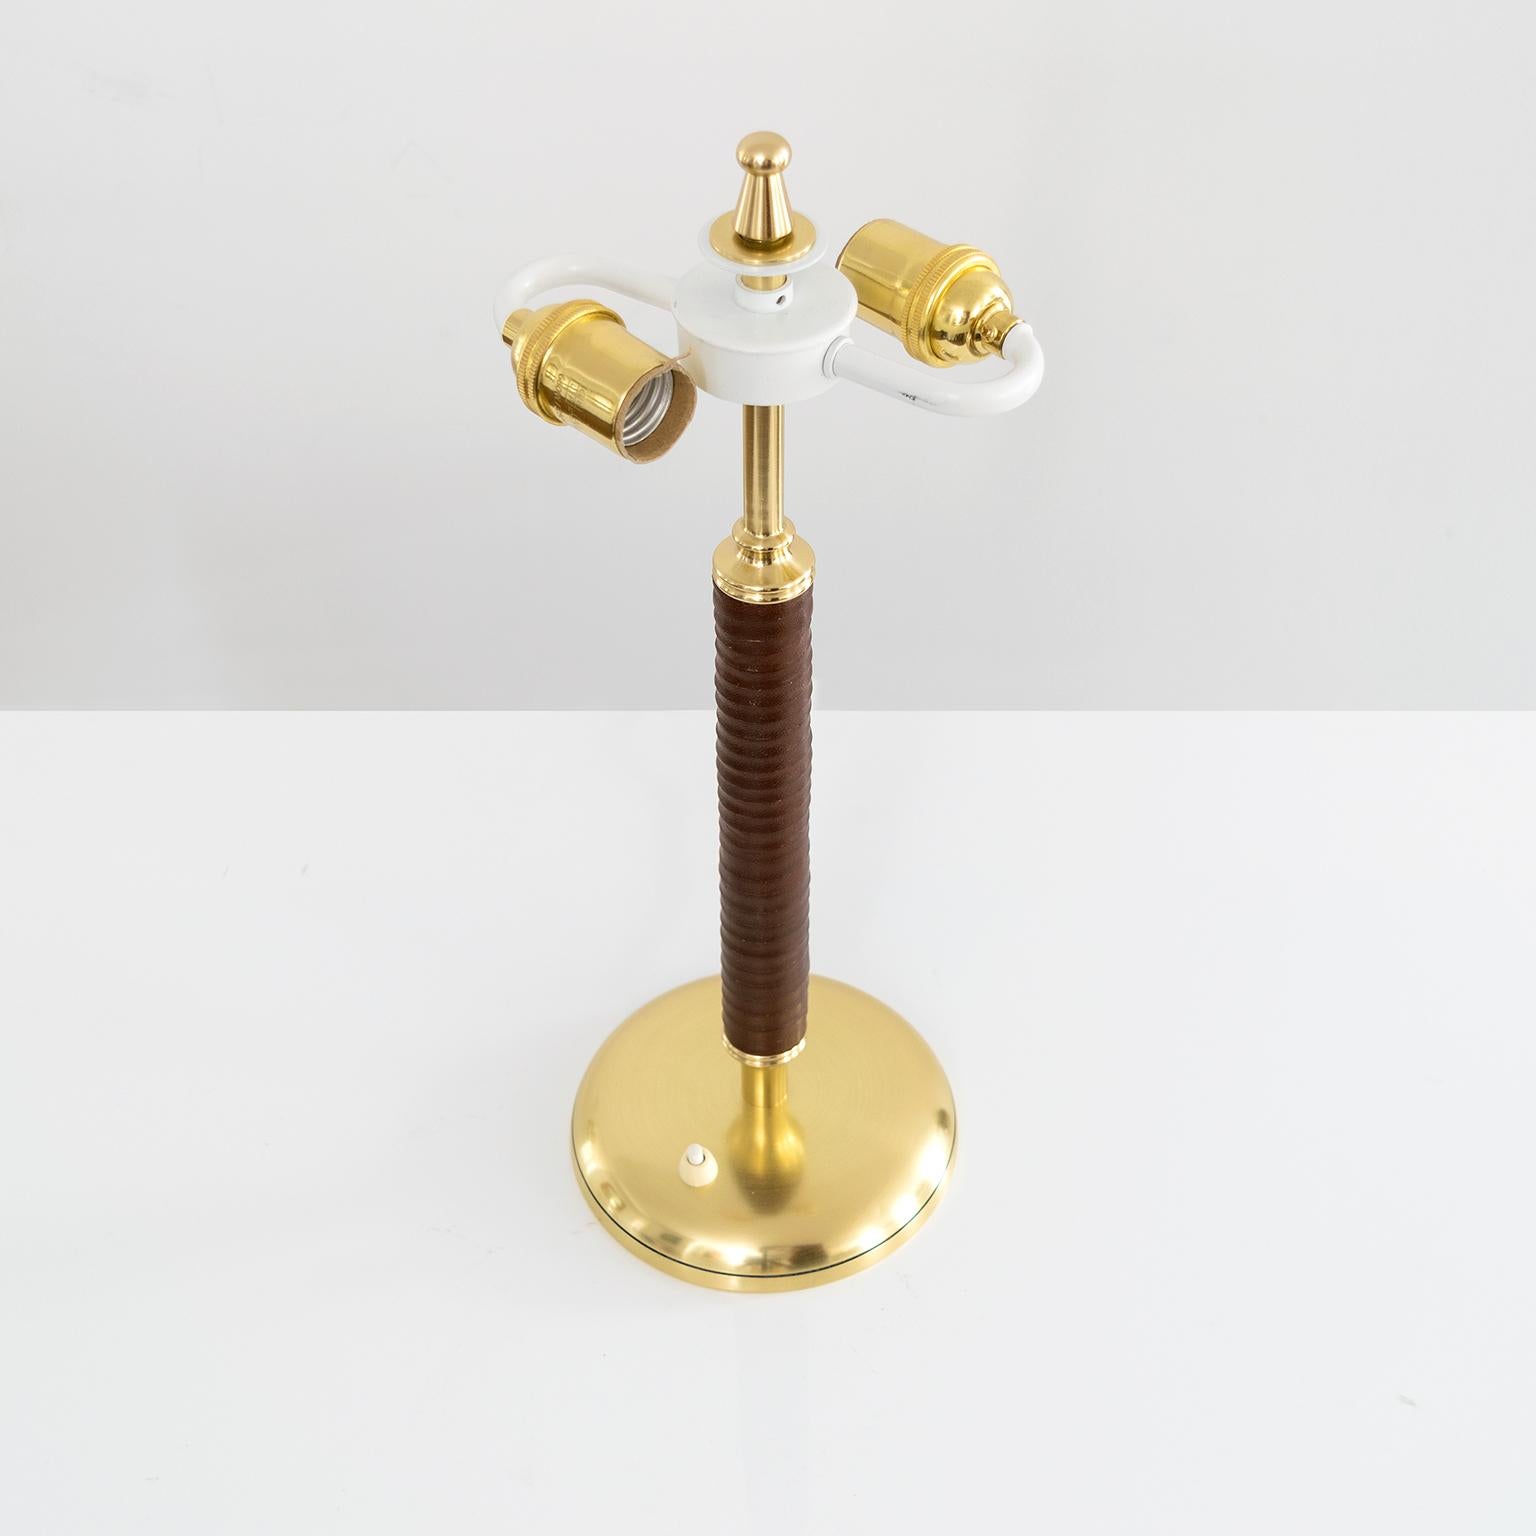 Polished Scandinavian Modern Swedish Midcentury Brass and Leather Table Lamp